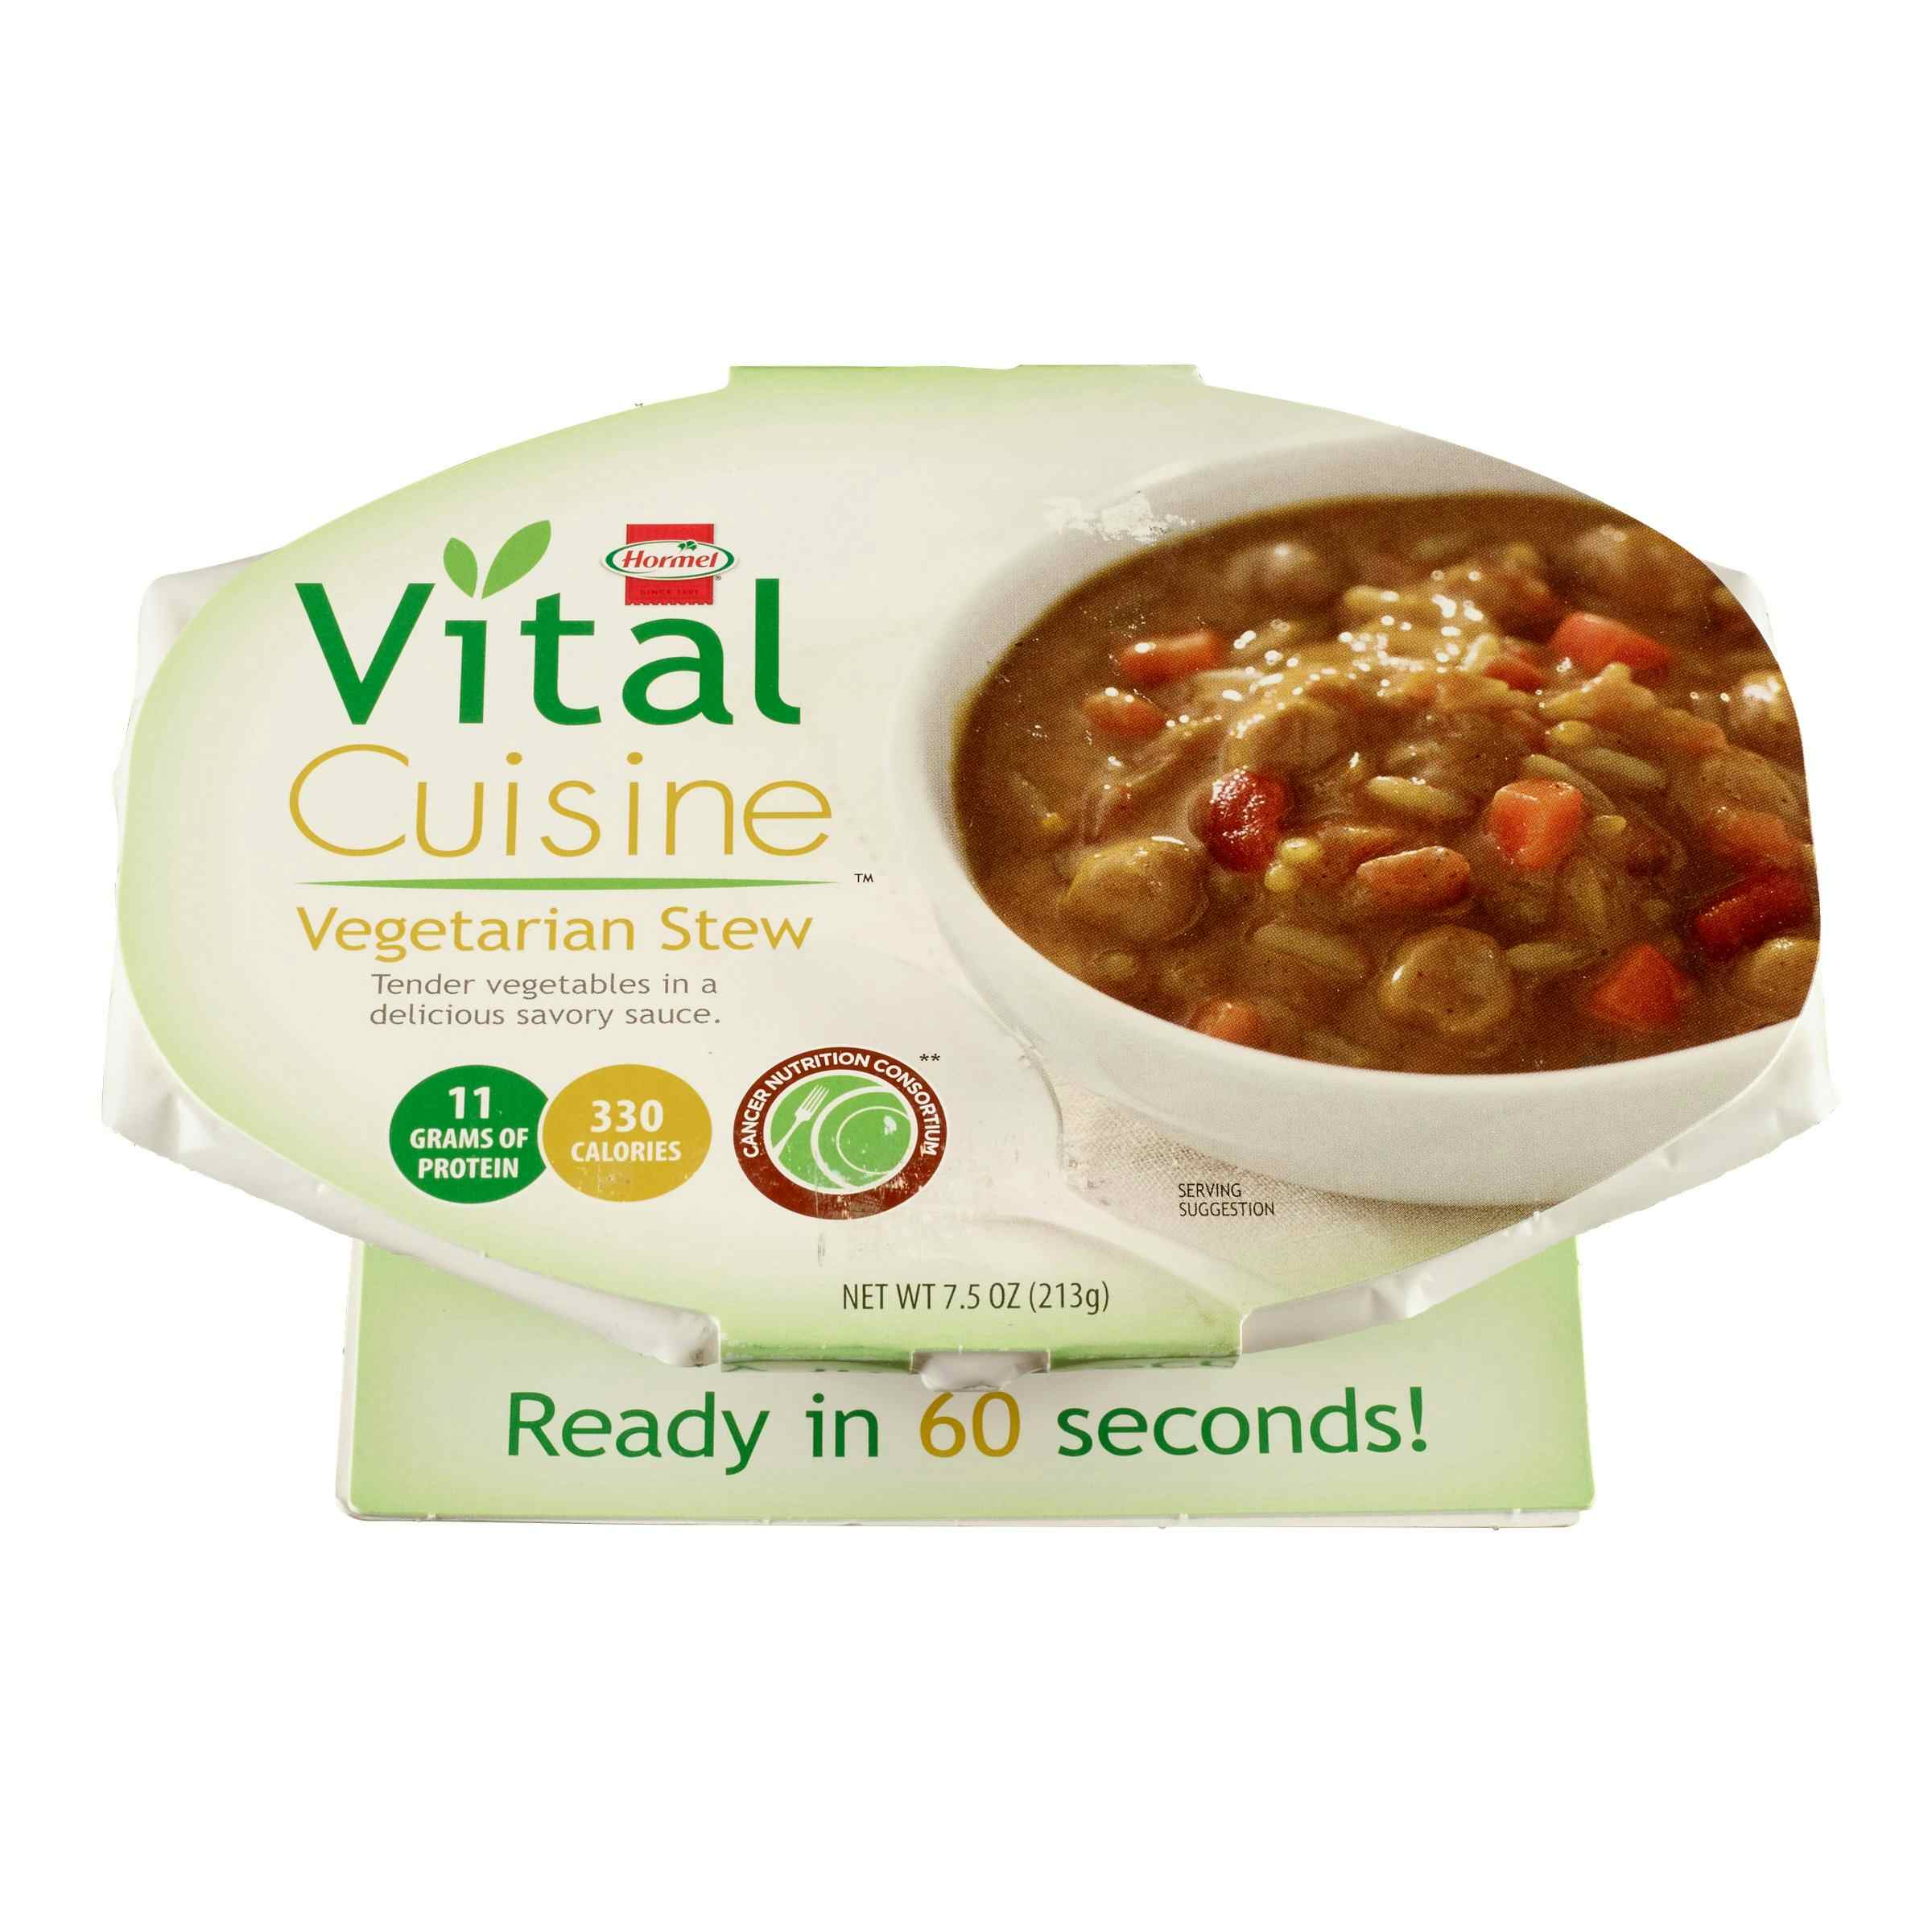 Vital Cuisine Ready to Use Oral Supplement Bowl, Vegetarian Stew Flavor , 69074, Vegetarian Stew - Case of 1